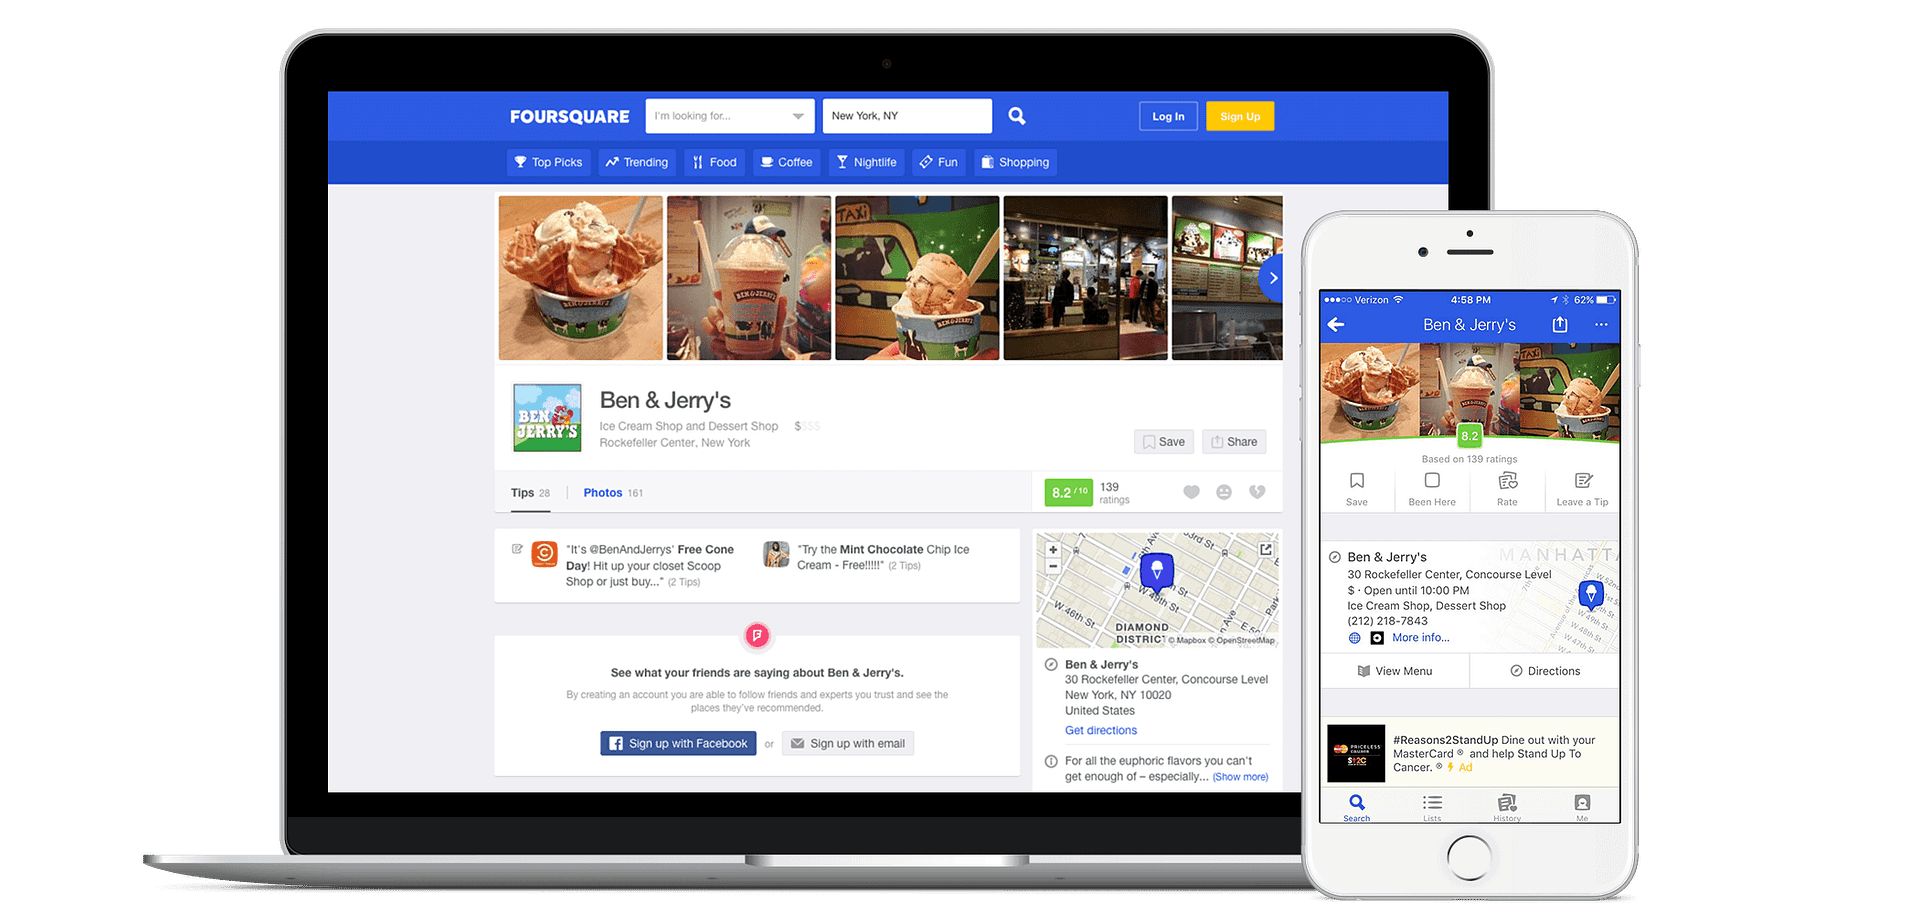 Add Your Business to Foursquare